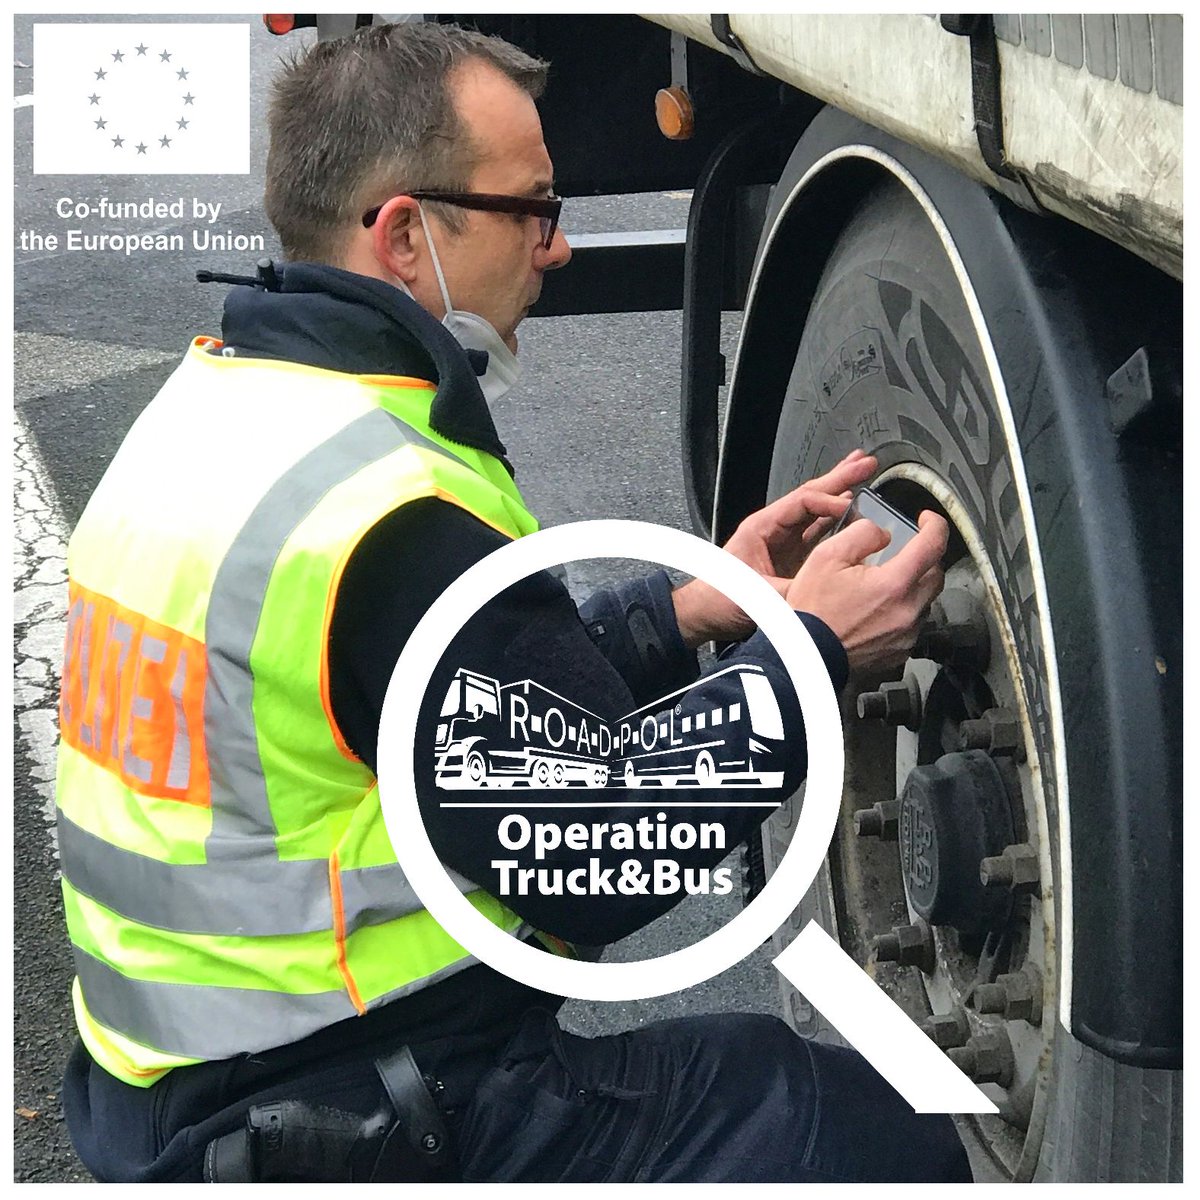 🚚 There are no 'minor' technical violatons on a truck. Even the smallest deviation can trigger a chain of events leading to a crash 🖤 And crashes involving trucks are generally devastating 👮‍♂️ 👮‍♀️ ROADPOL Truck&Bus Operation coming up next week across Europe #police #roadsafety